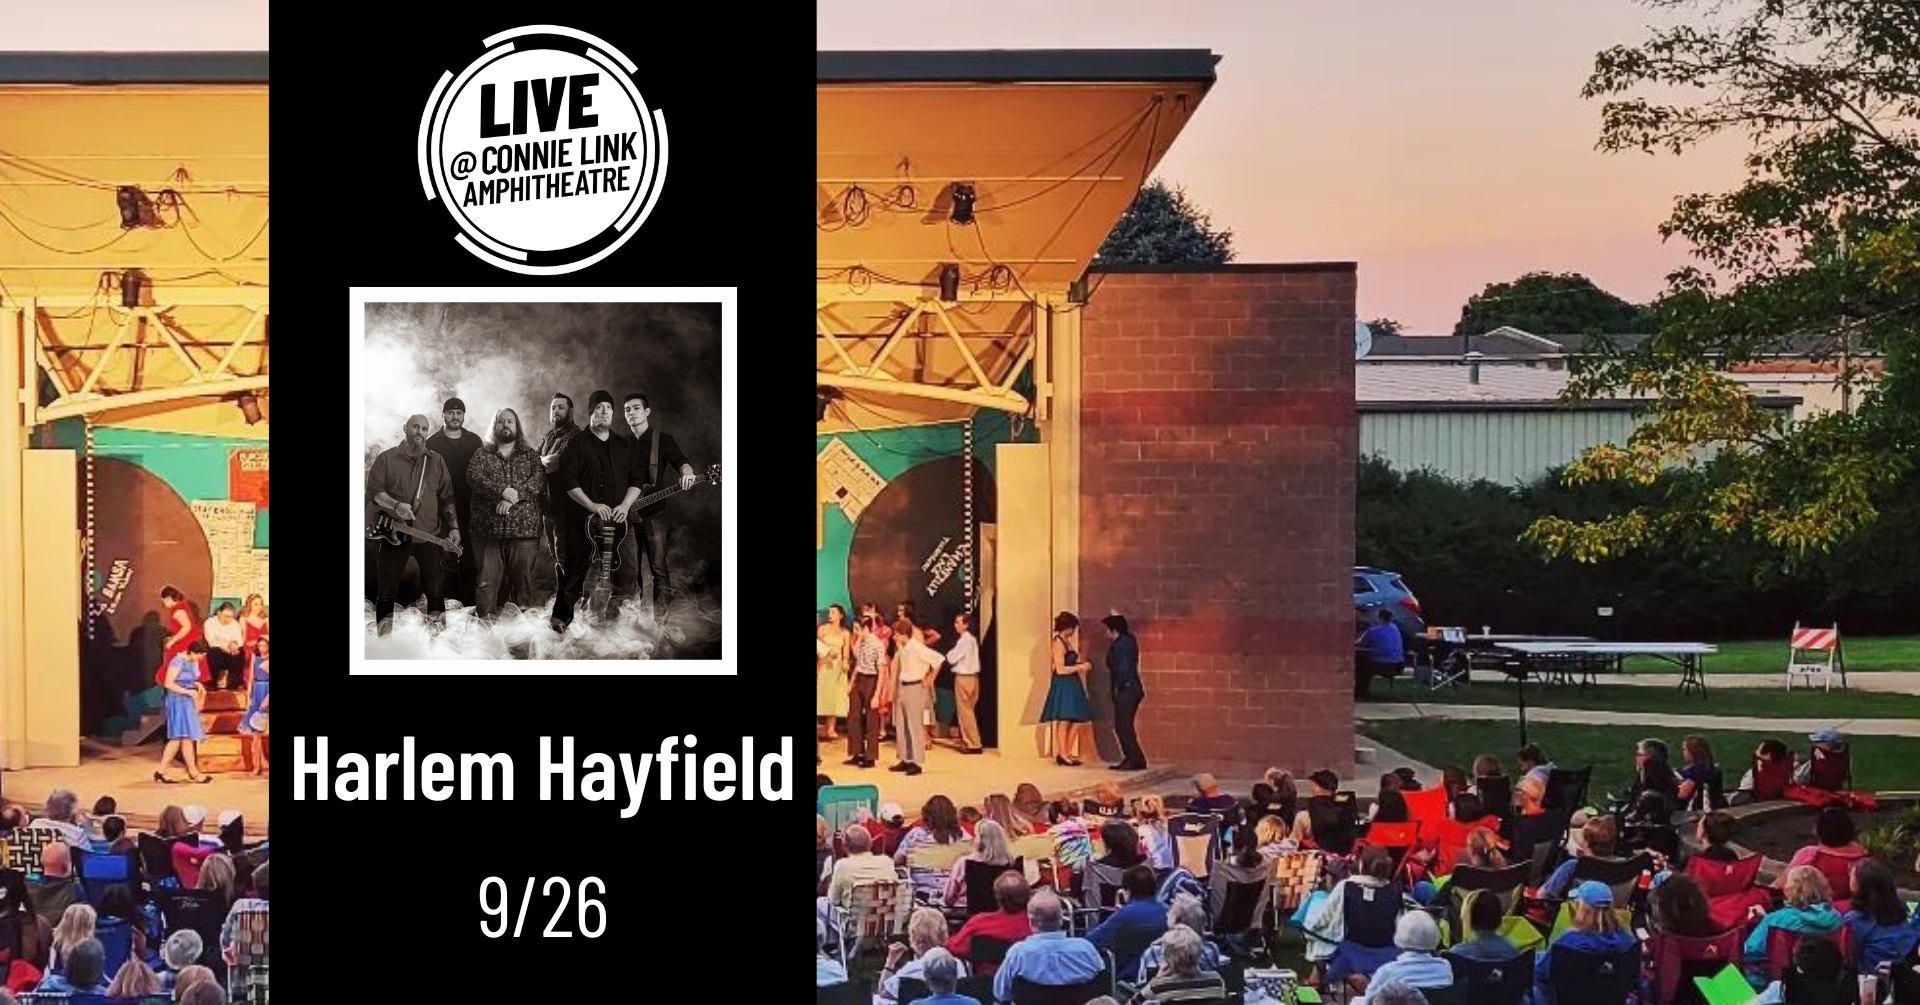 Normal LIVE presents Harlem Hayfield @ Connie Link Amphitheatre